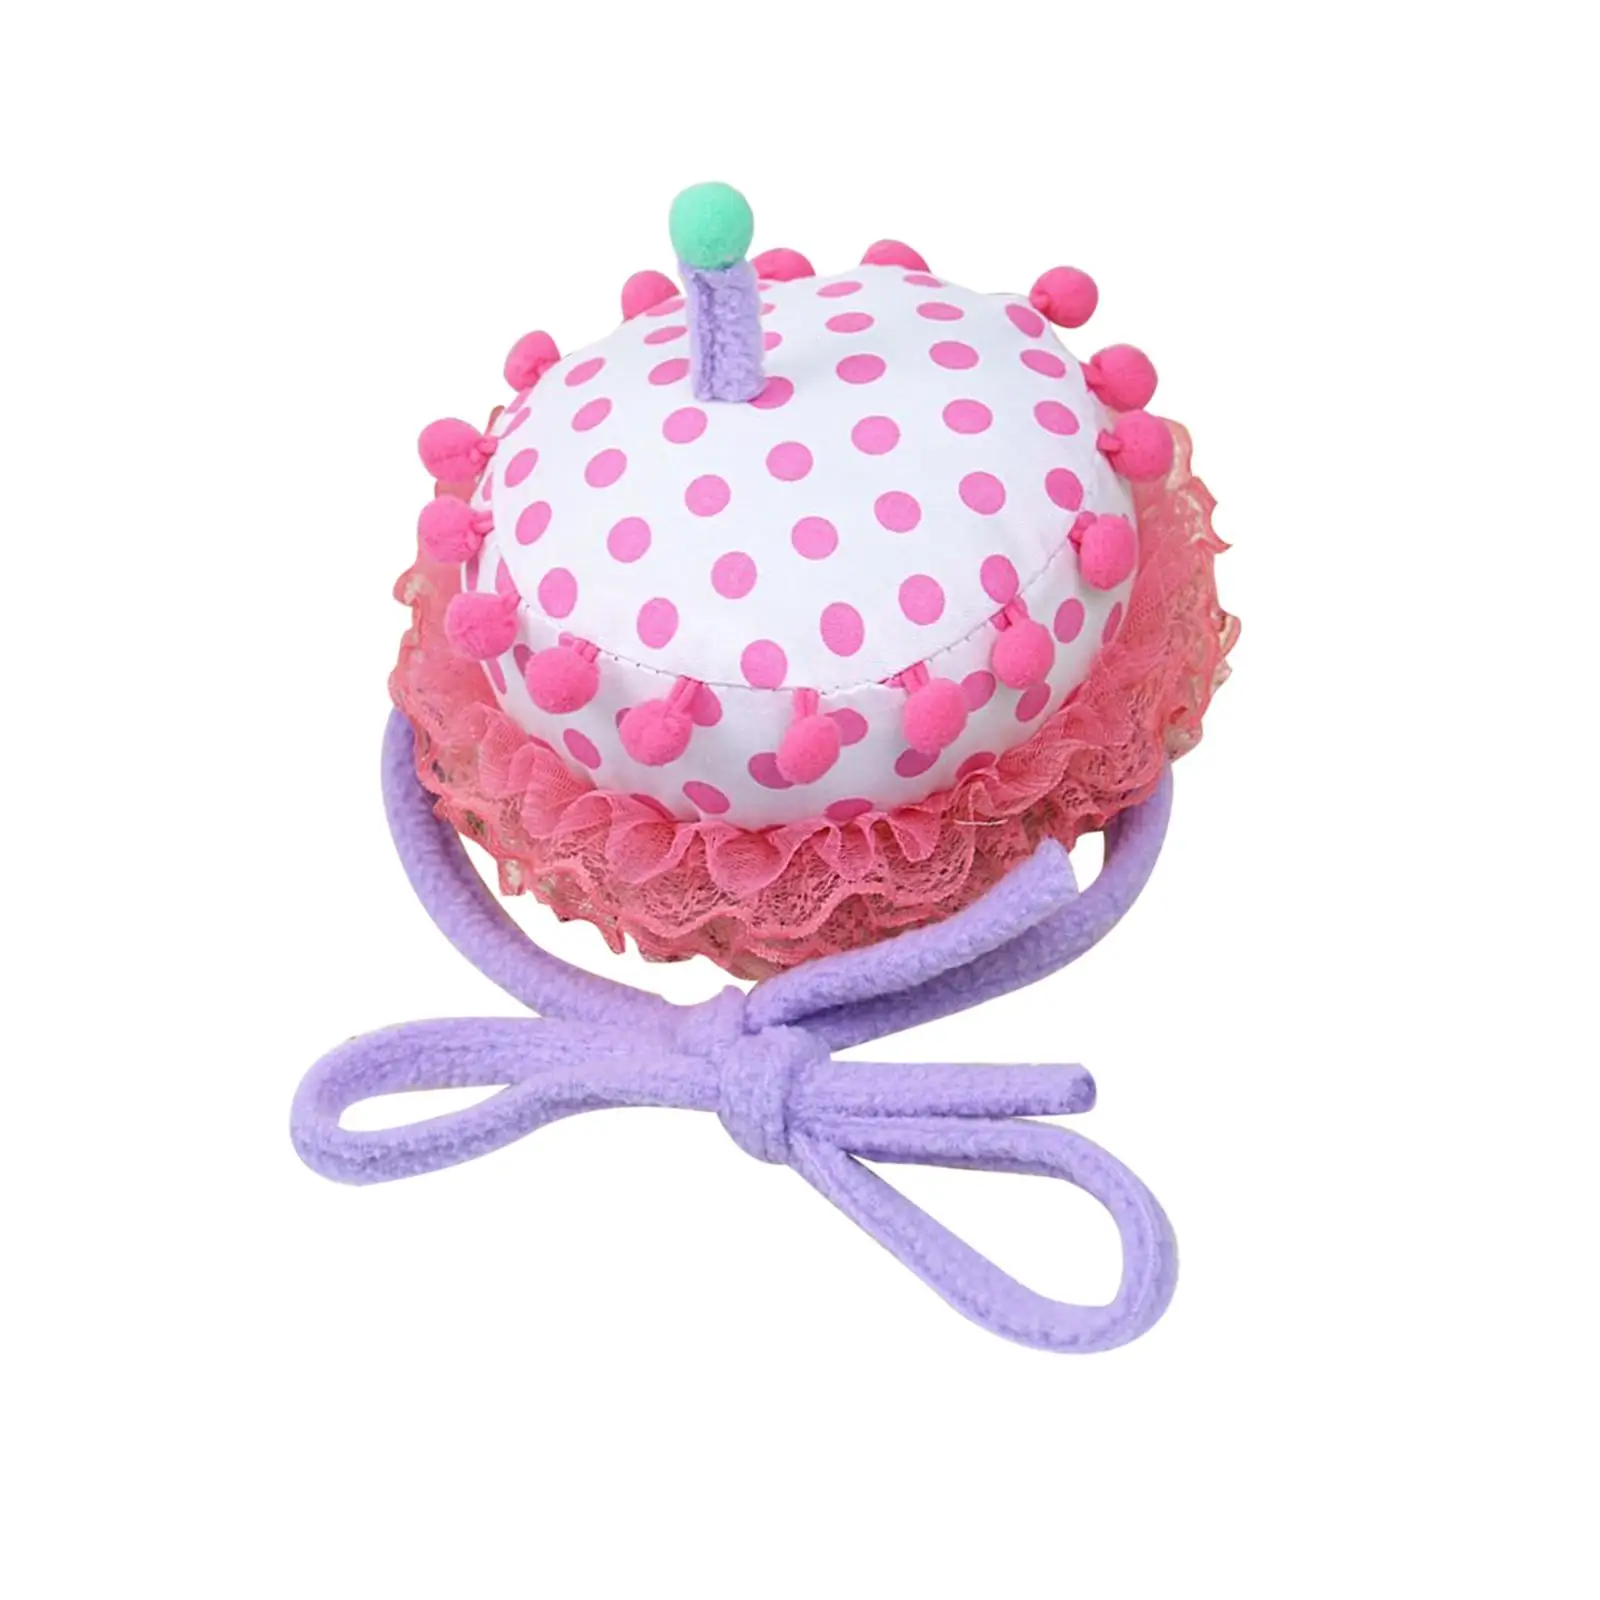 Cute Happy Birthday cakes top Hat Birthday Pattern Washable Birthday Cake Hat for Kitten Small Large Dogs Masquerade Theme Party